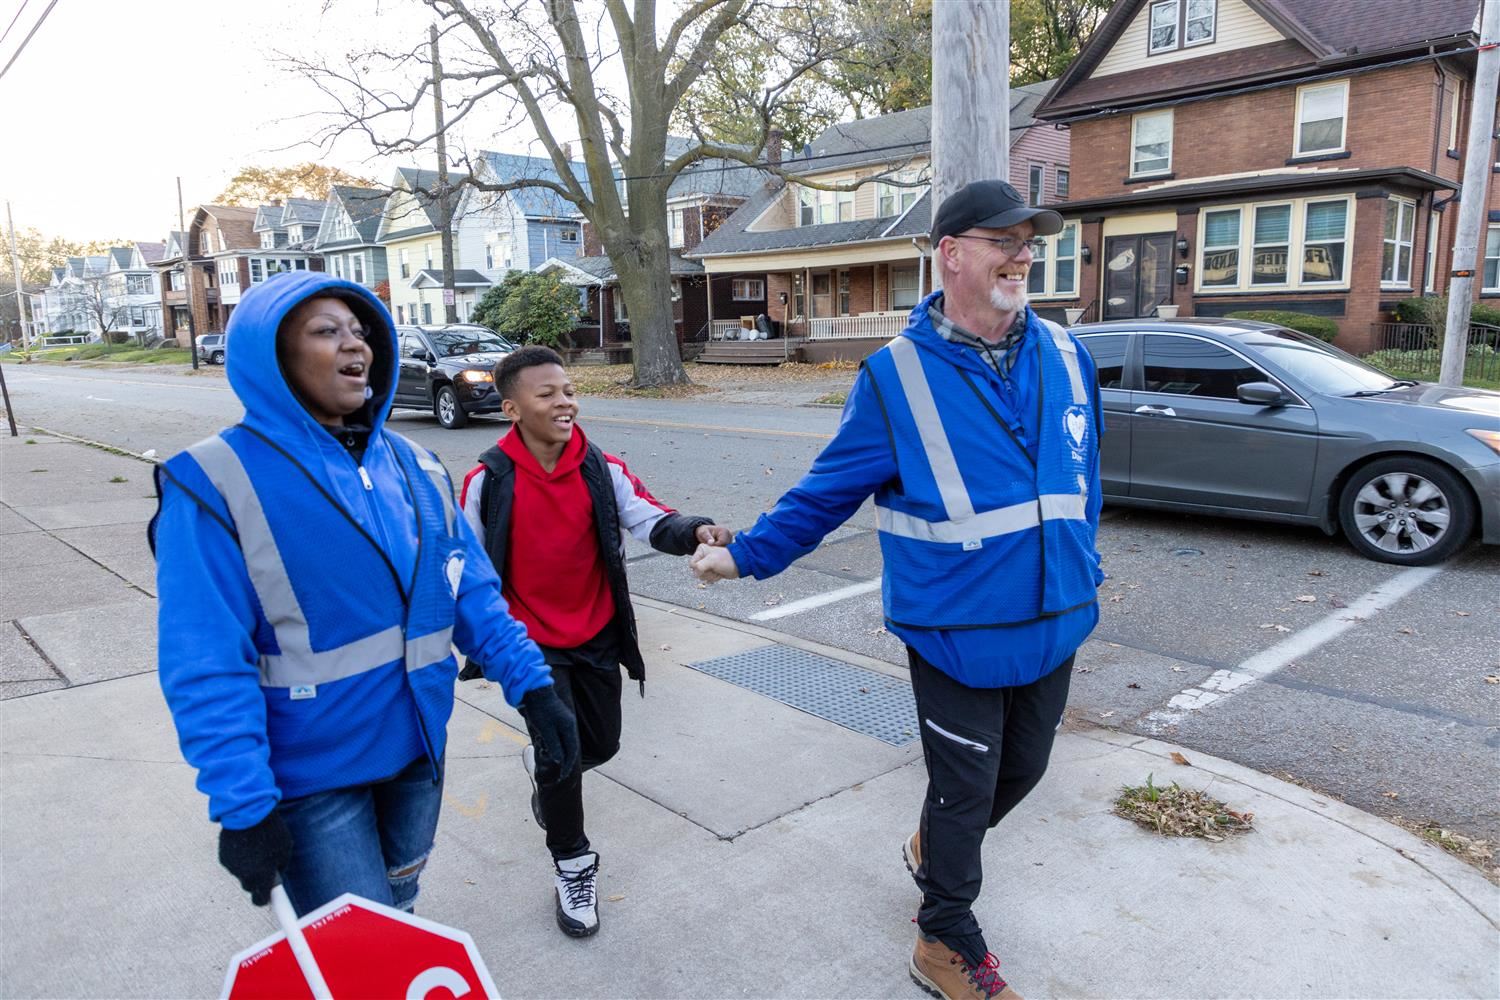 Picture shows two members of the Blue Coats peacekeeping initiative walking with a smiling male student.